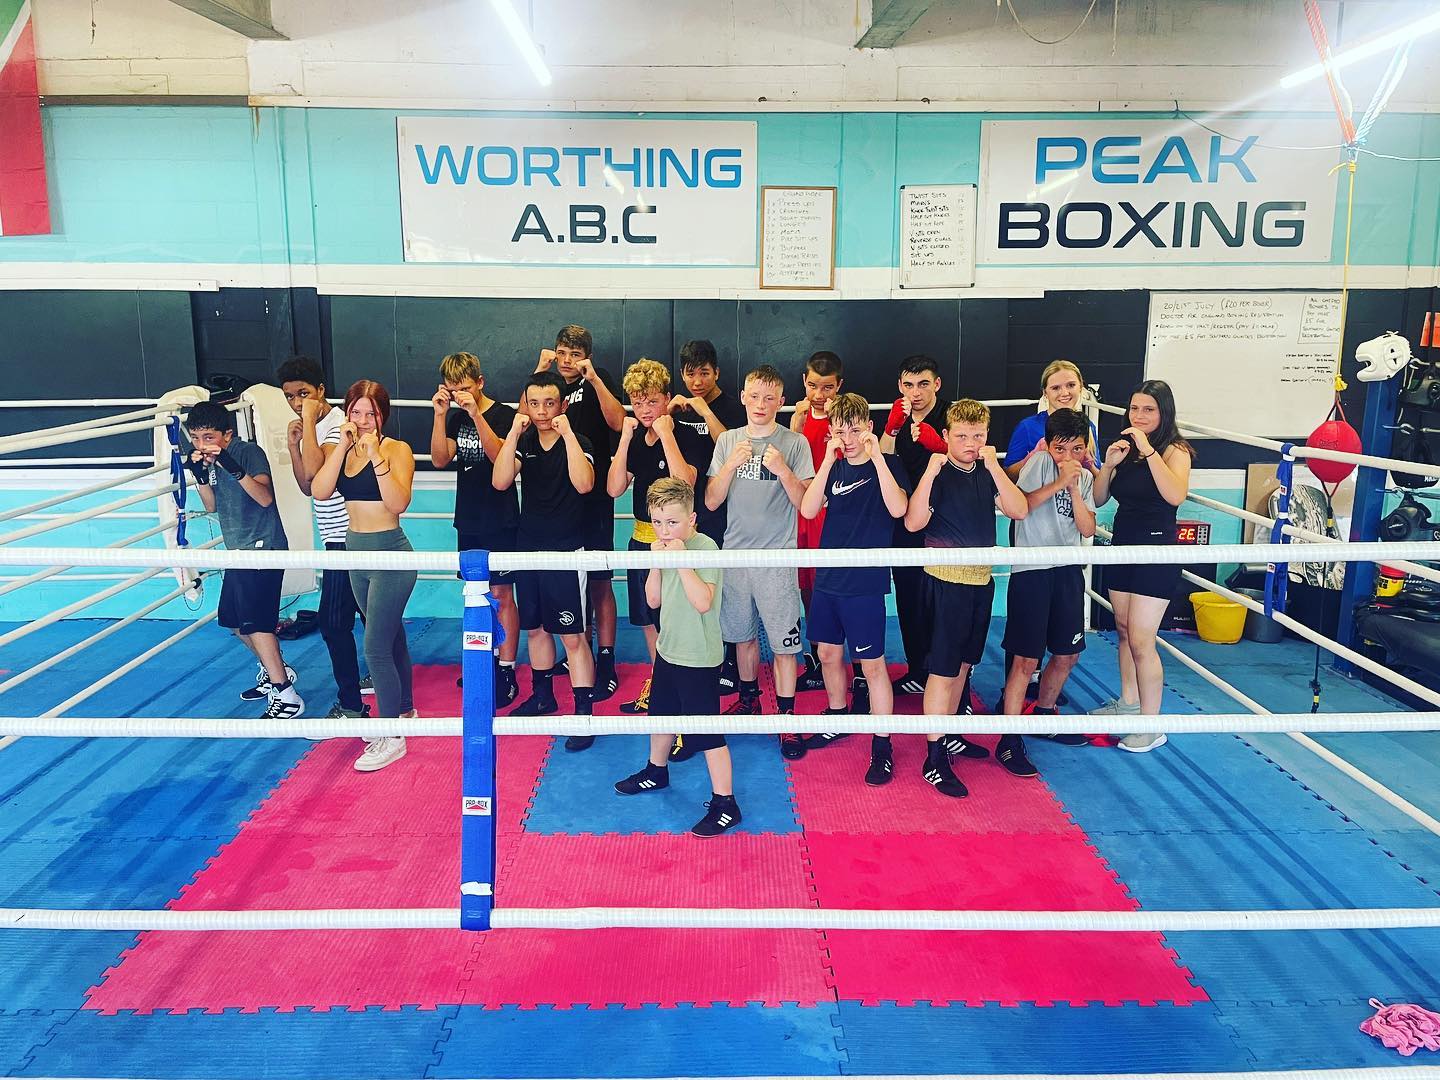 Juniors Boxing Session at Peak Boxing in Worthing